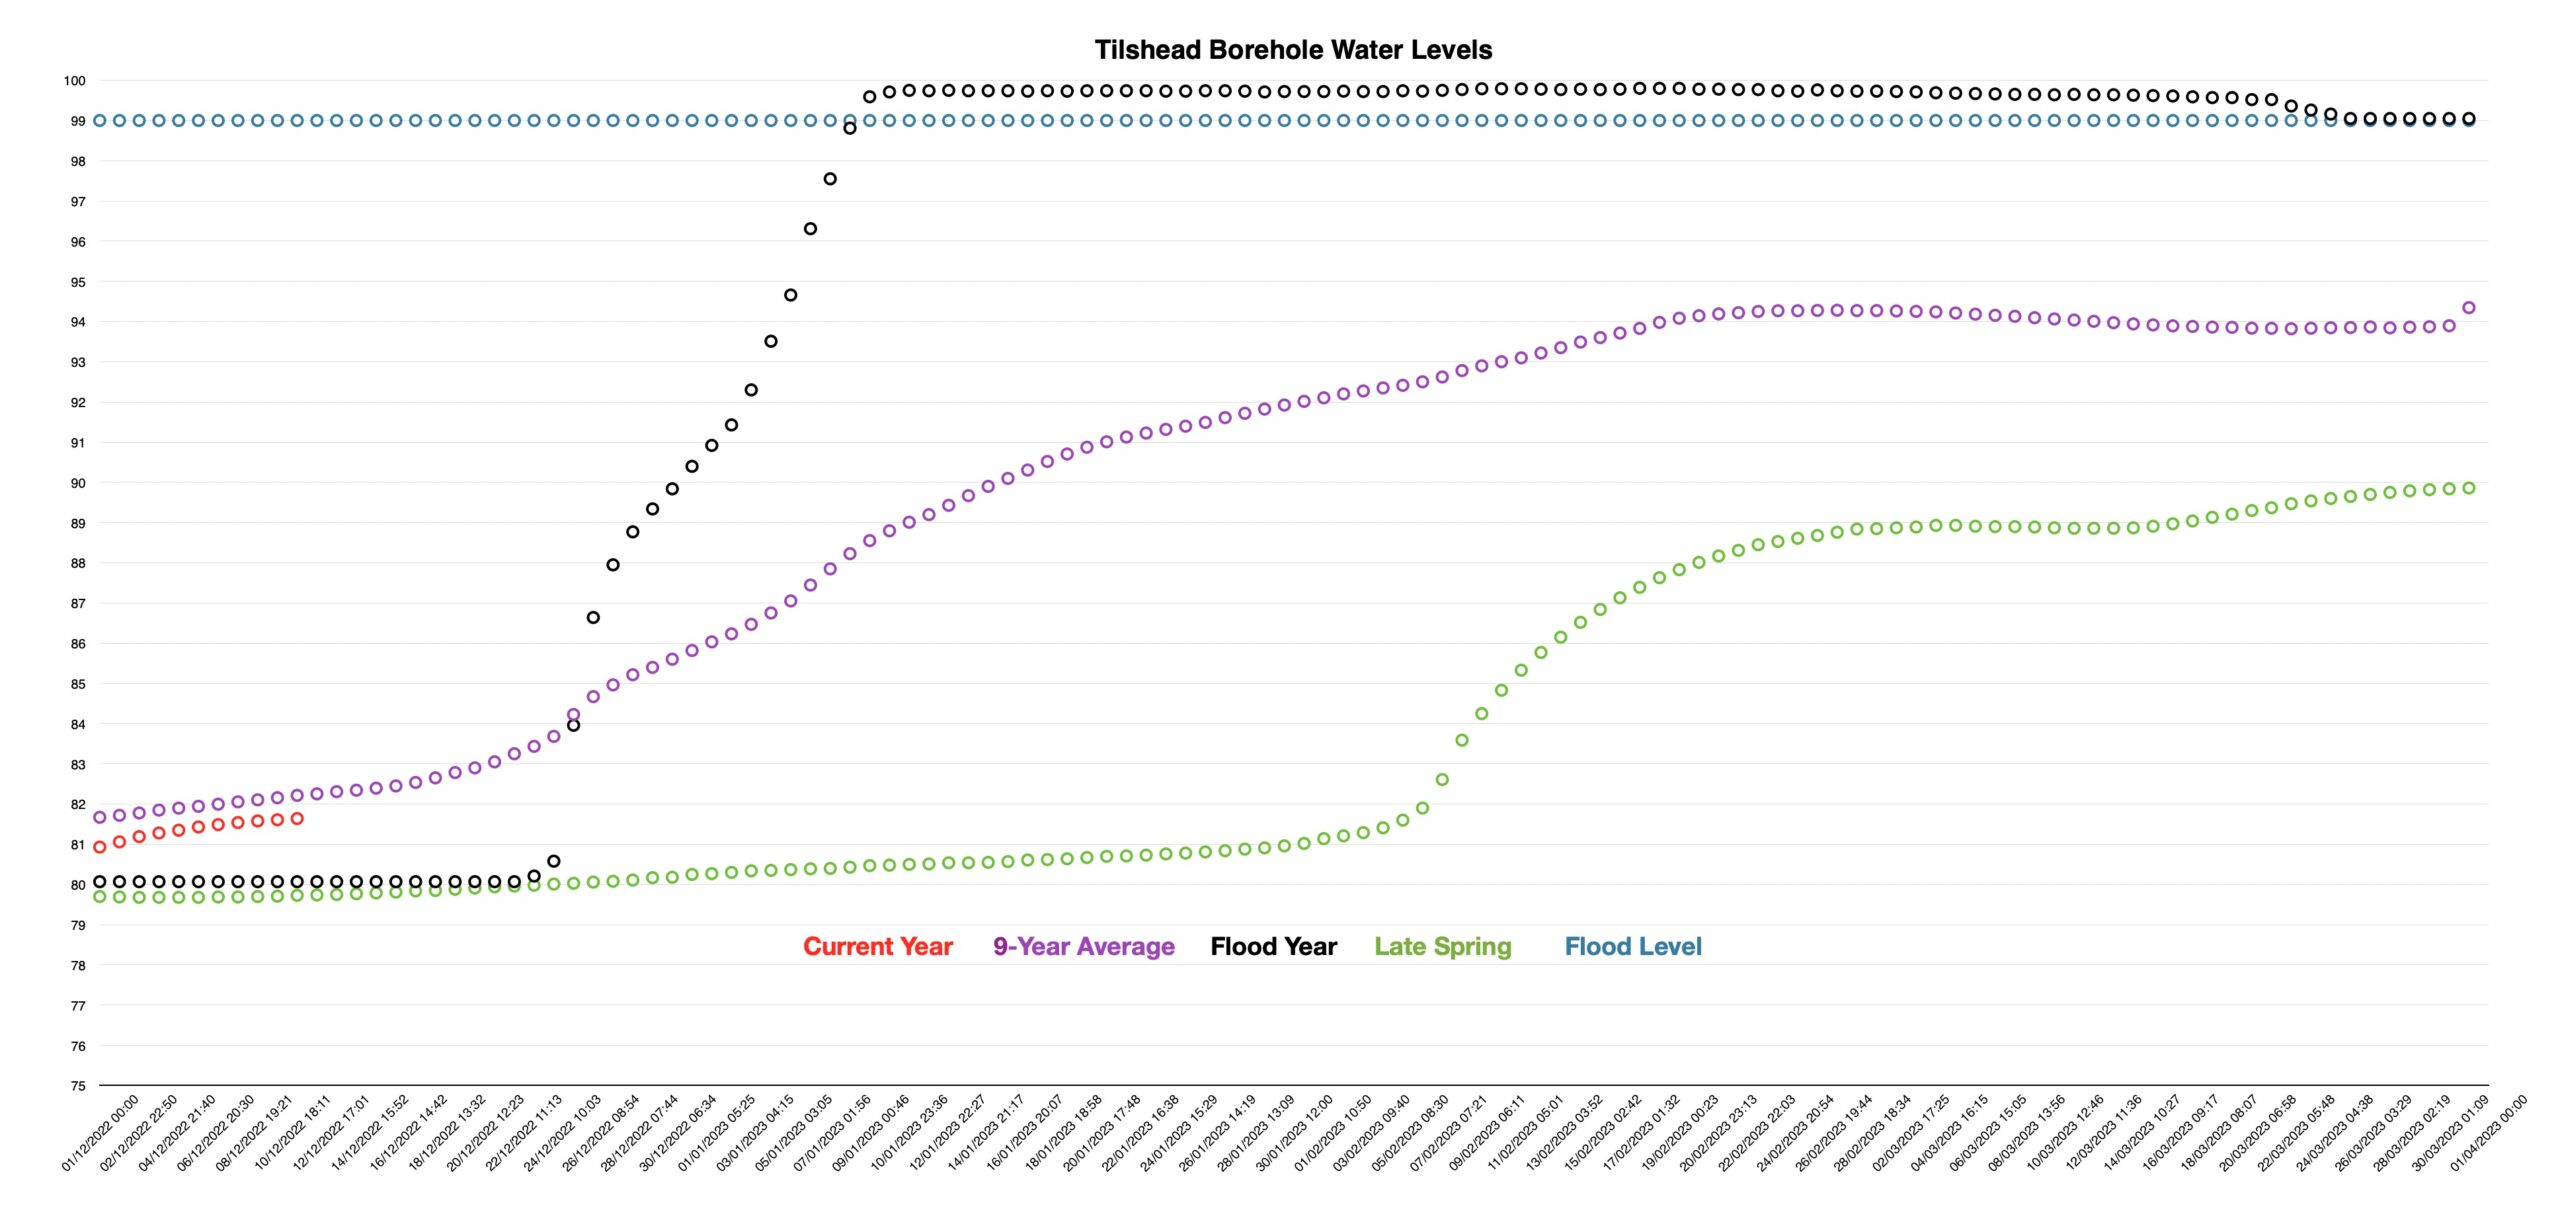 Borehole levels show a steady upward trend despite lack of rain during the week. Levels are still below average.